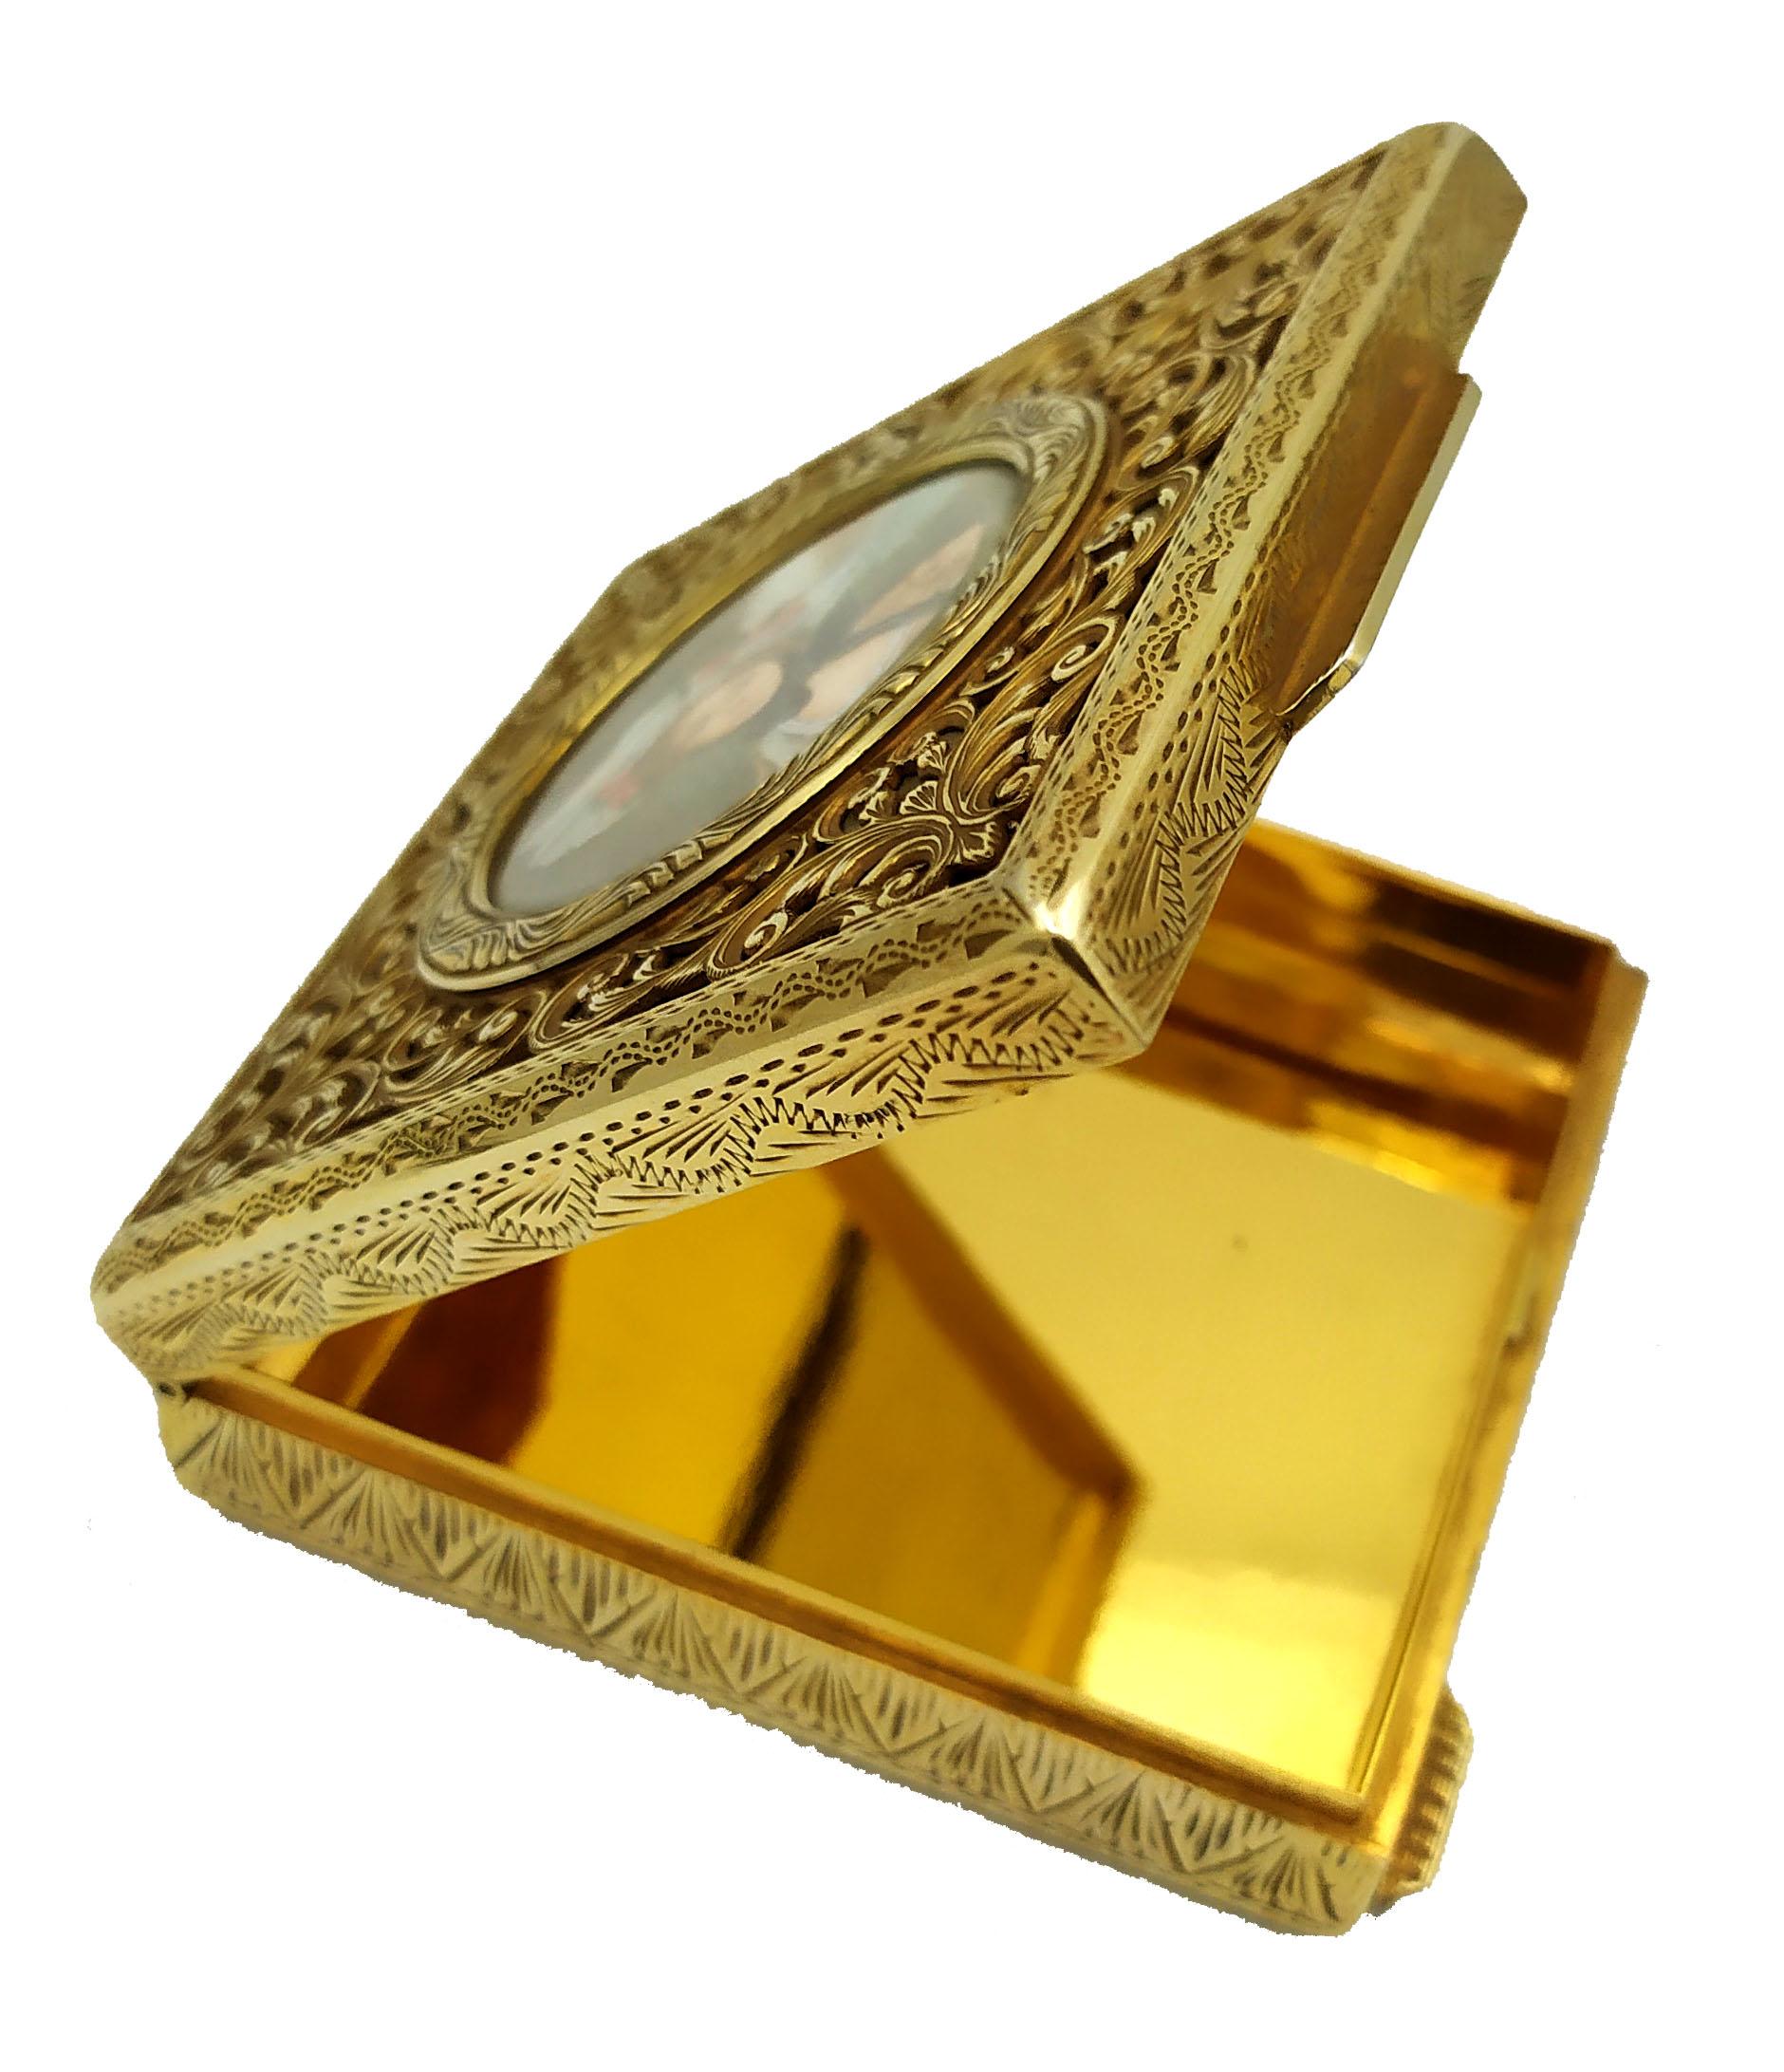 Snuff Box Perforated Lid, Embossed and Engraved Miniature Salimbeni For Sale 2